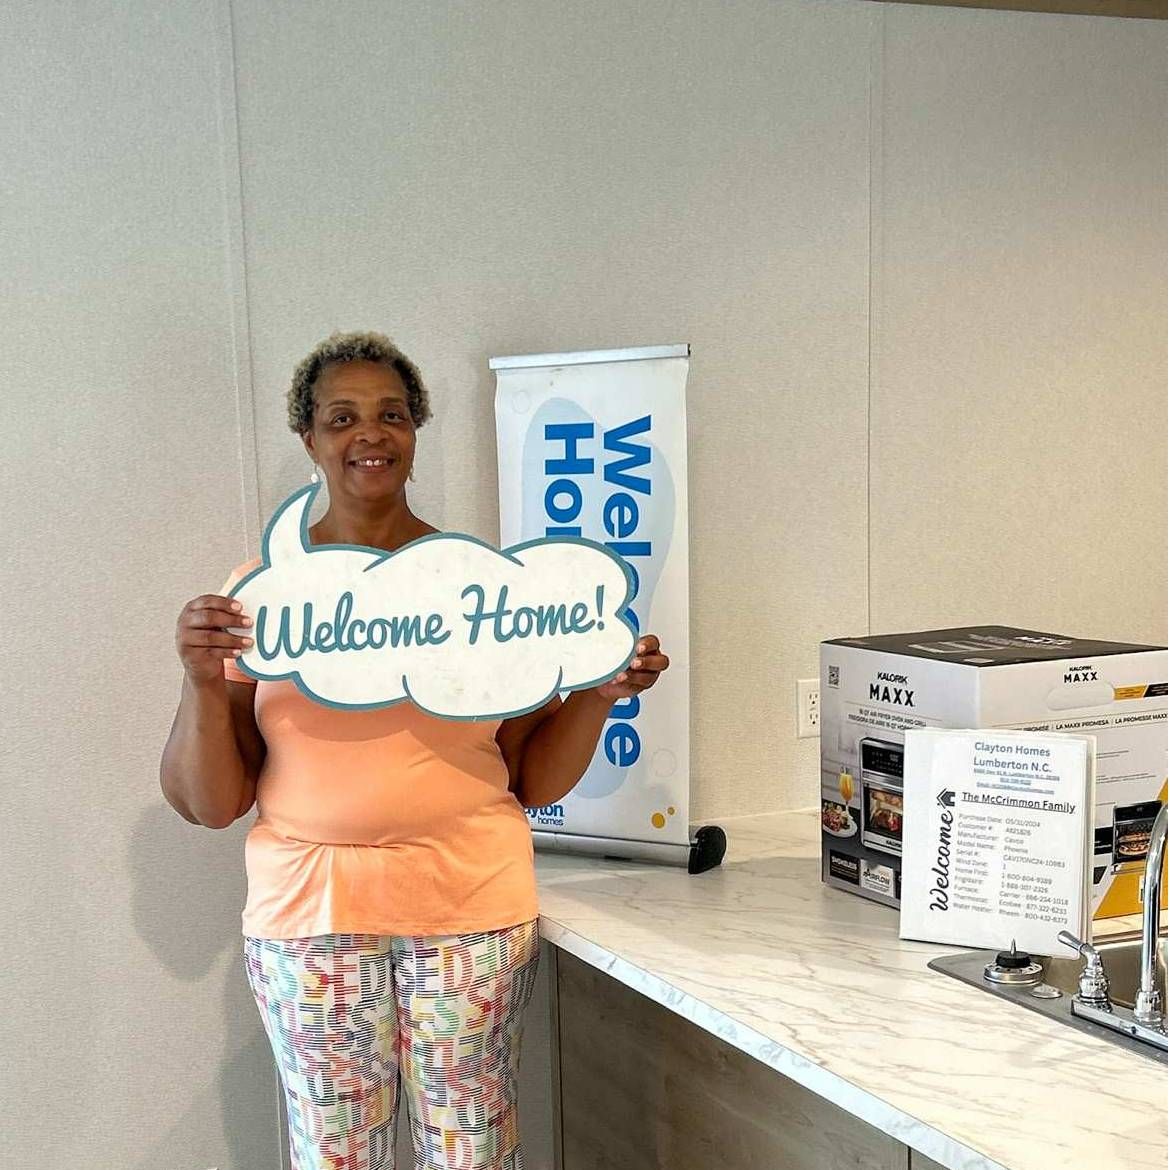 Shirley M. welcome home image